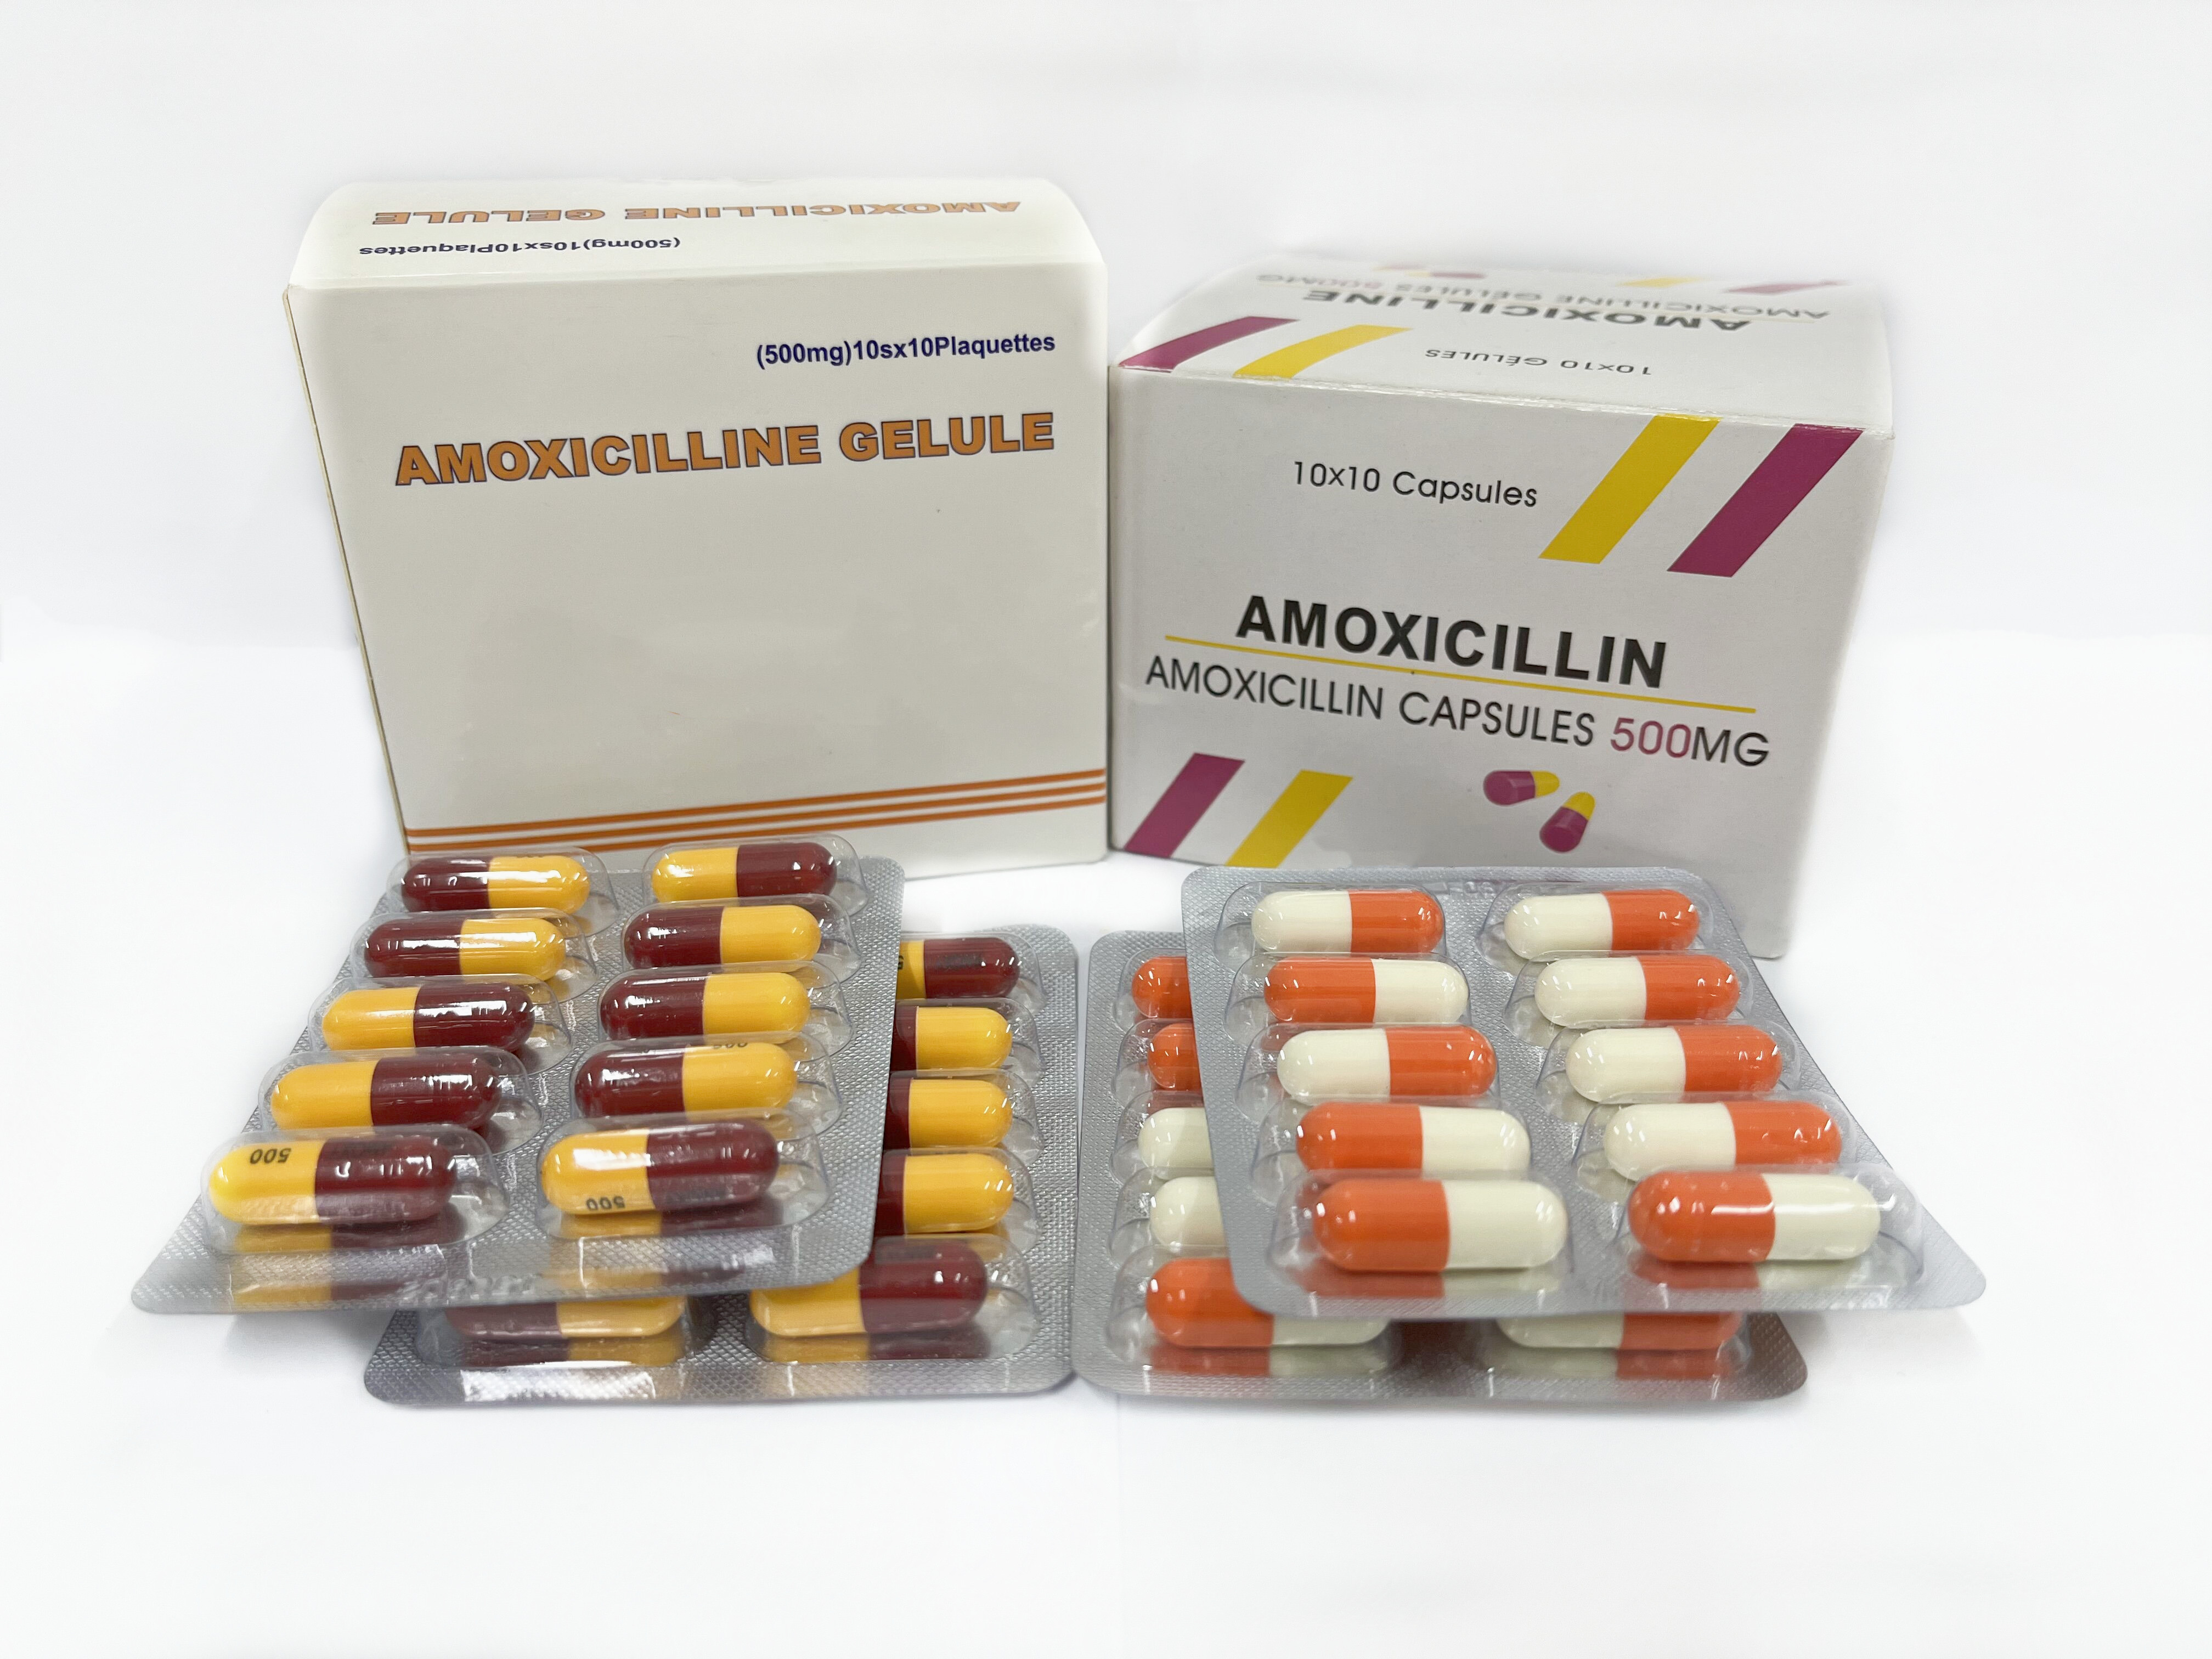 Study finds oral amoxicillin safe and effective for pregnant women allergic to penicillin